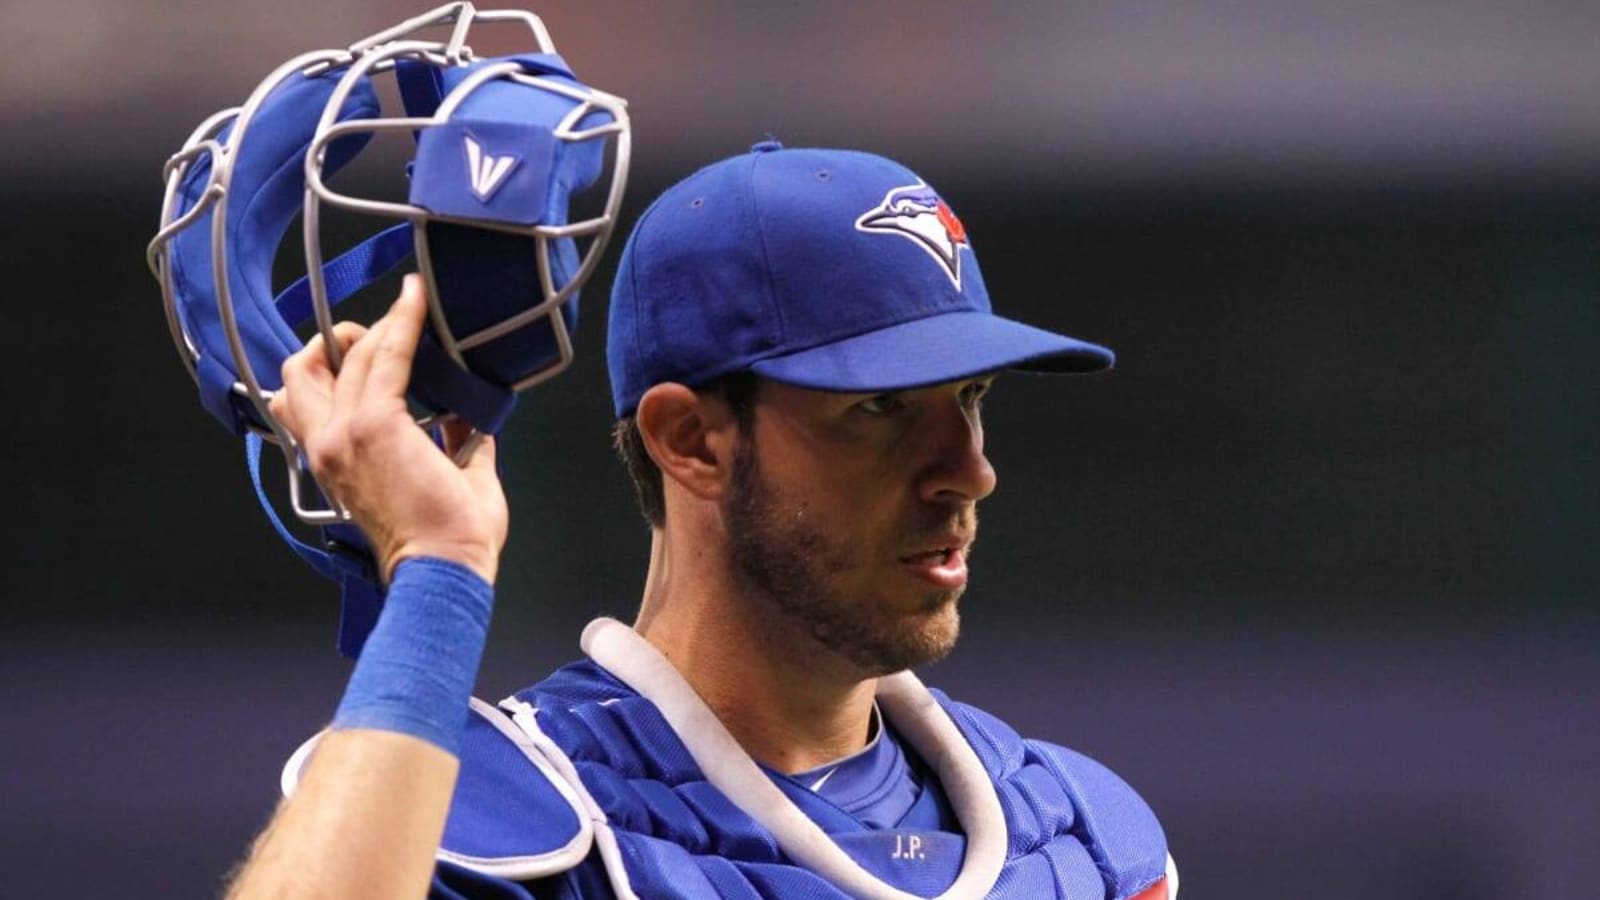 Former Blue Jays Catcher J.P. Arencibia Named Mets AAA Coach